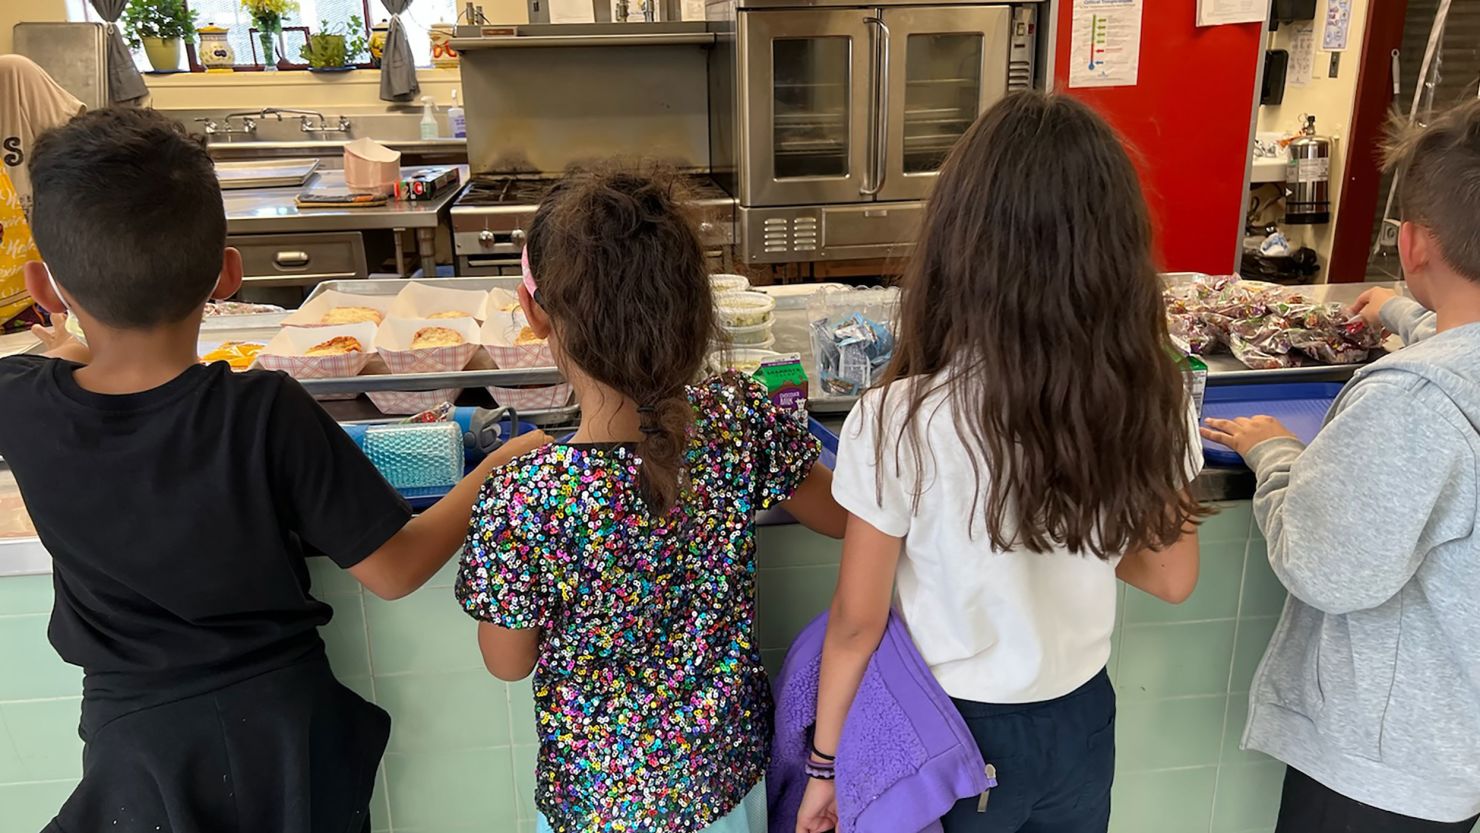 Hundreds of Tucson Unified School District students could lose access to free or reduced-price meals at school in mid-September if their parents don't submit new applications for the program.